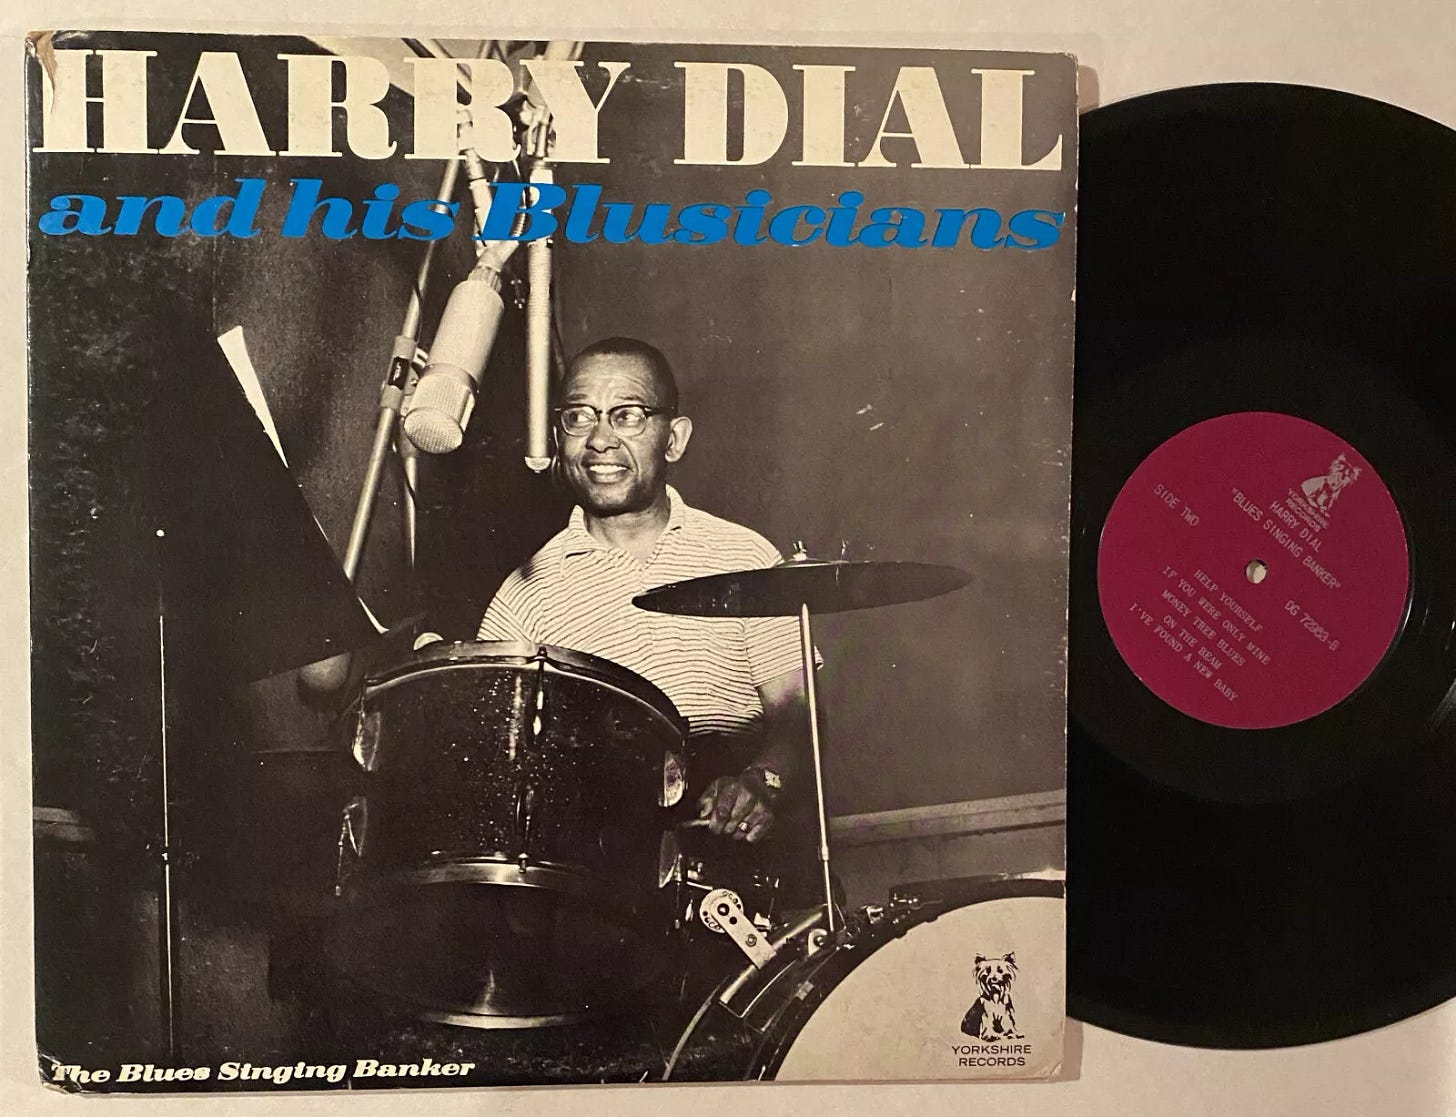 HARRY DIAL Blues Singing Banker Hilton Jefferson Irving Mouse Randolph LP - Picture 1 of 2